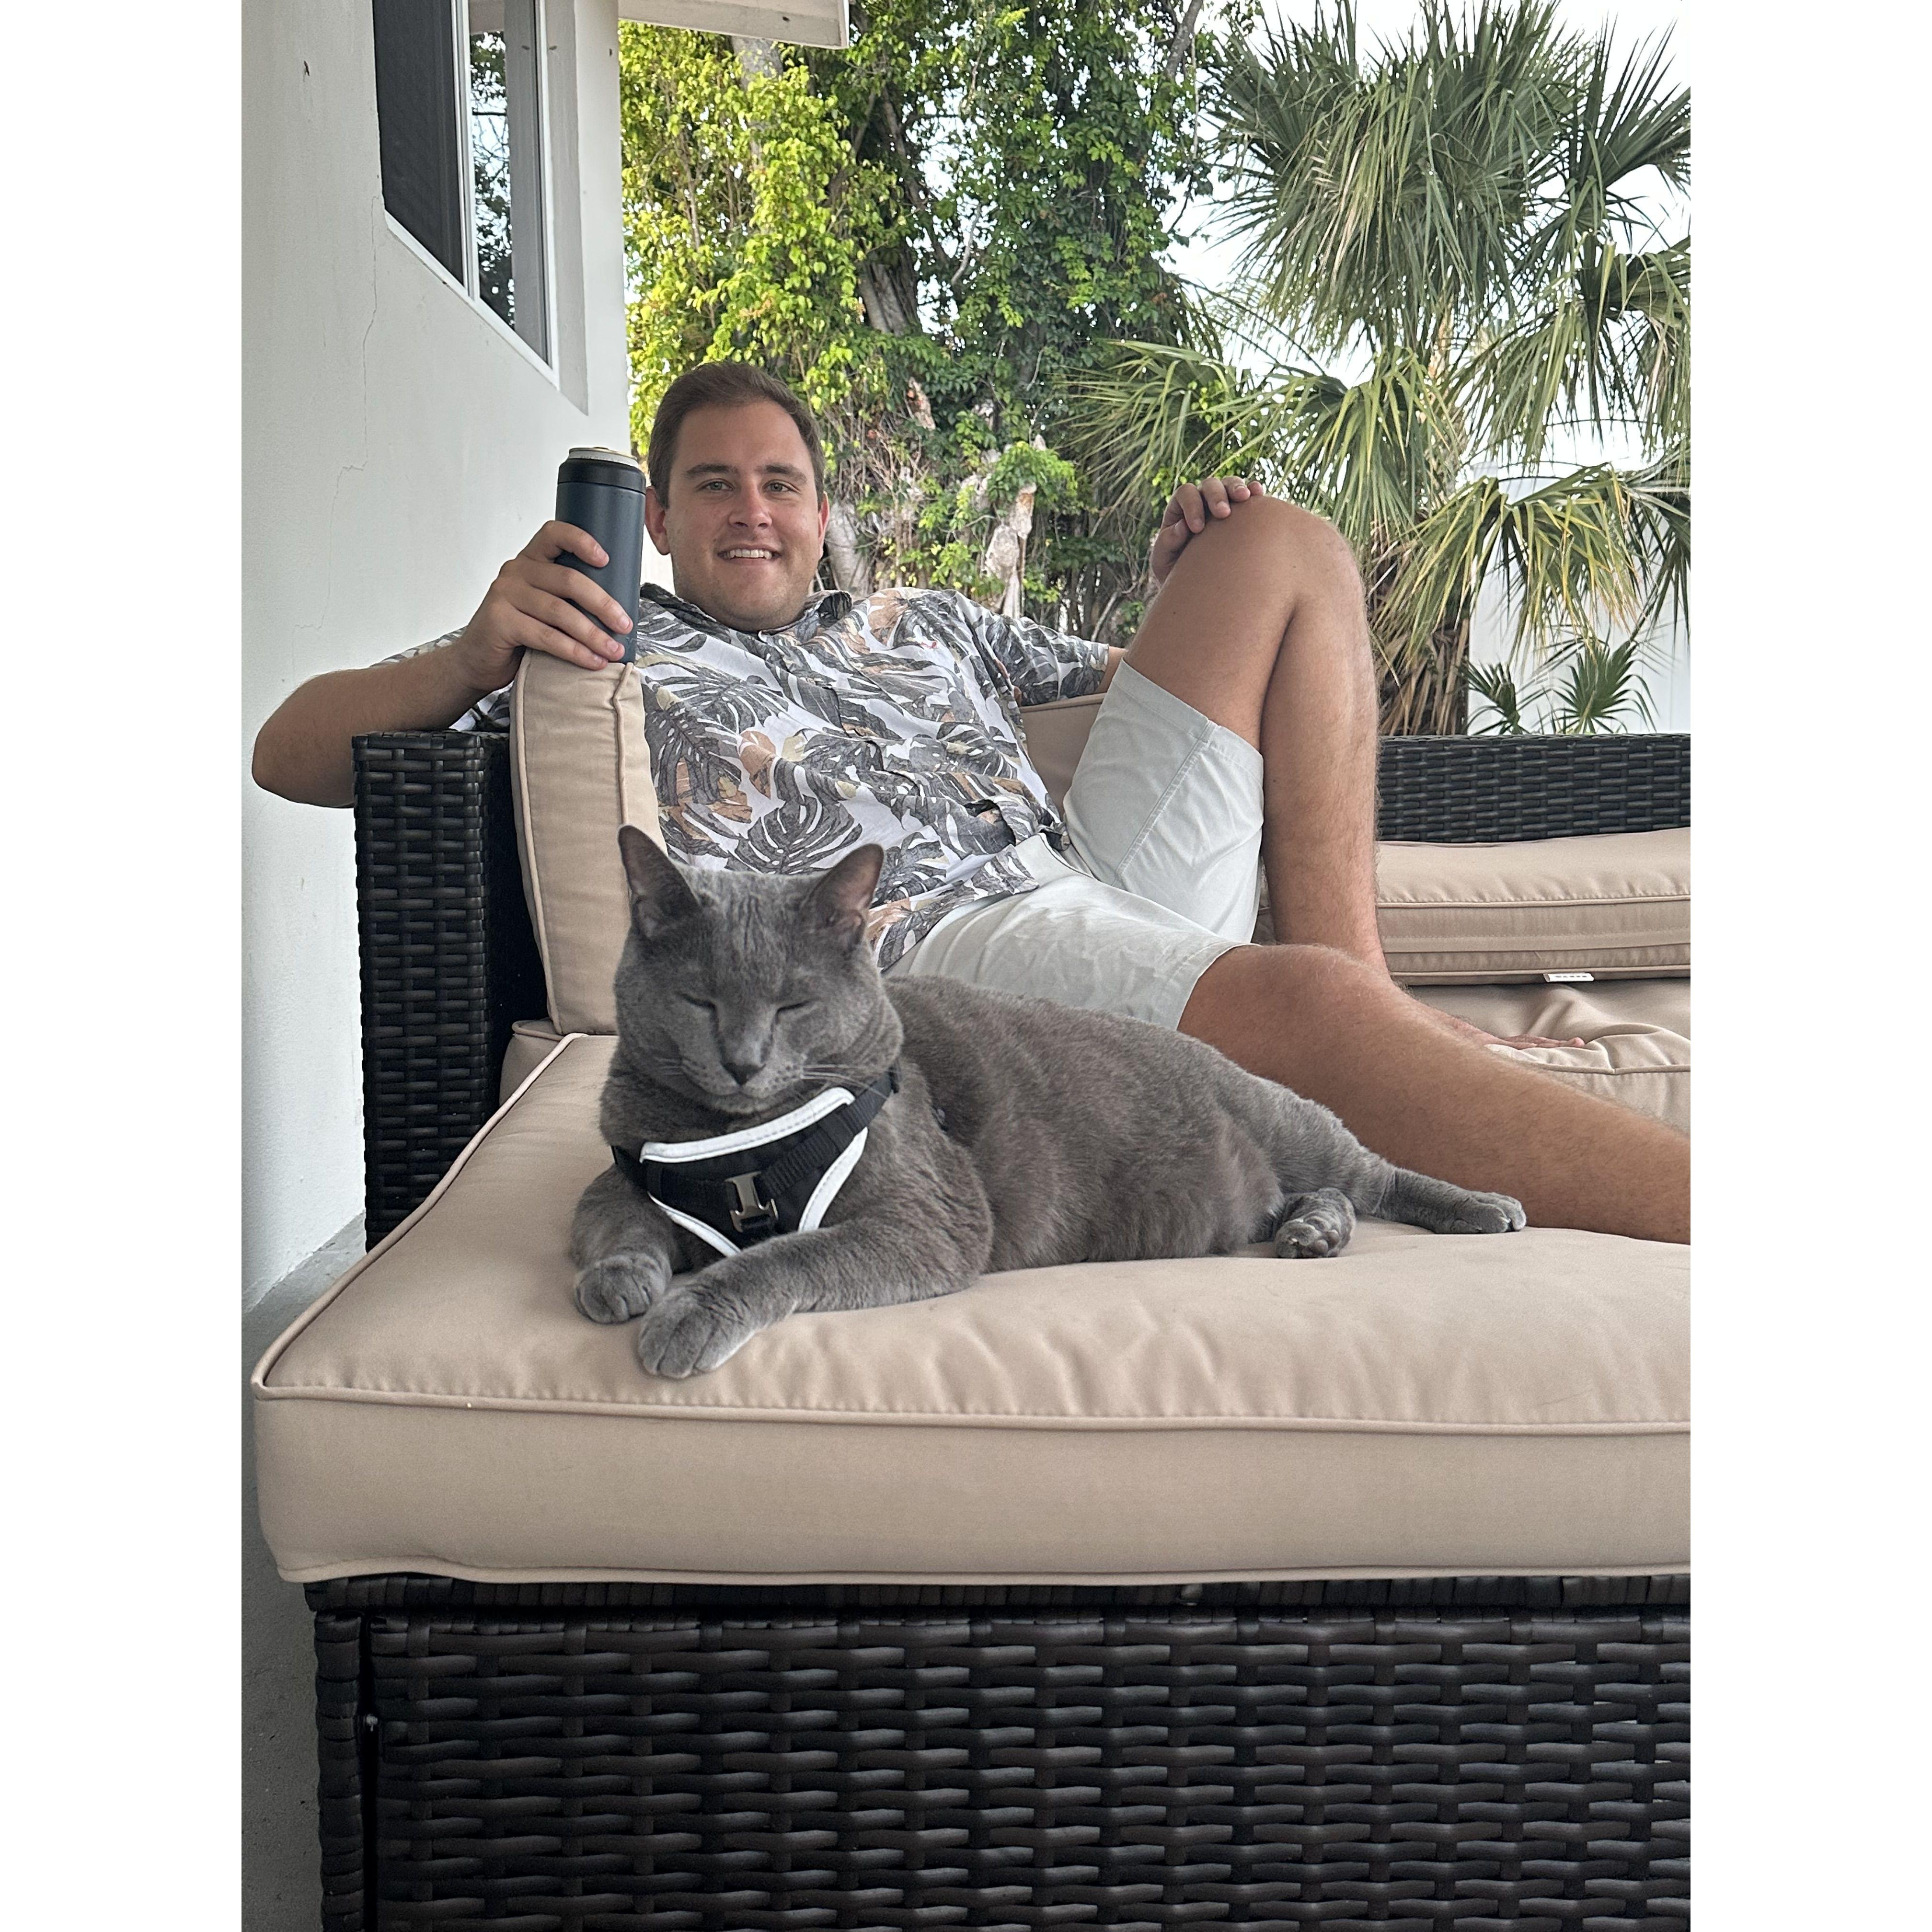 Fred, Jordan and their sweet cat, Romeo enjoy evenings on their outdoor patio in their new Palm Beach home. They anxiously await the big day to come! 2.11.2024 <3